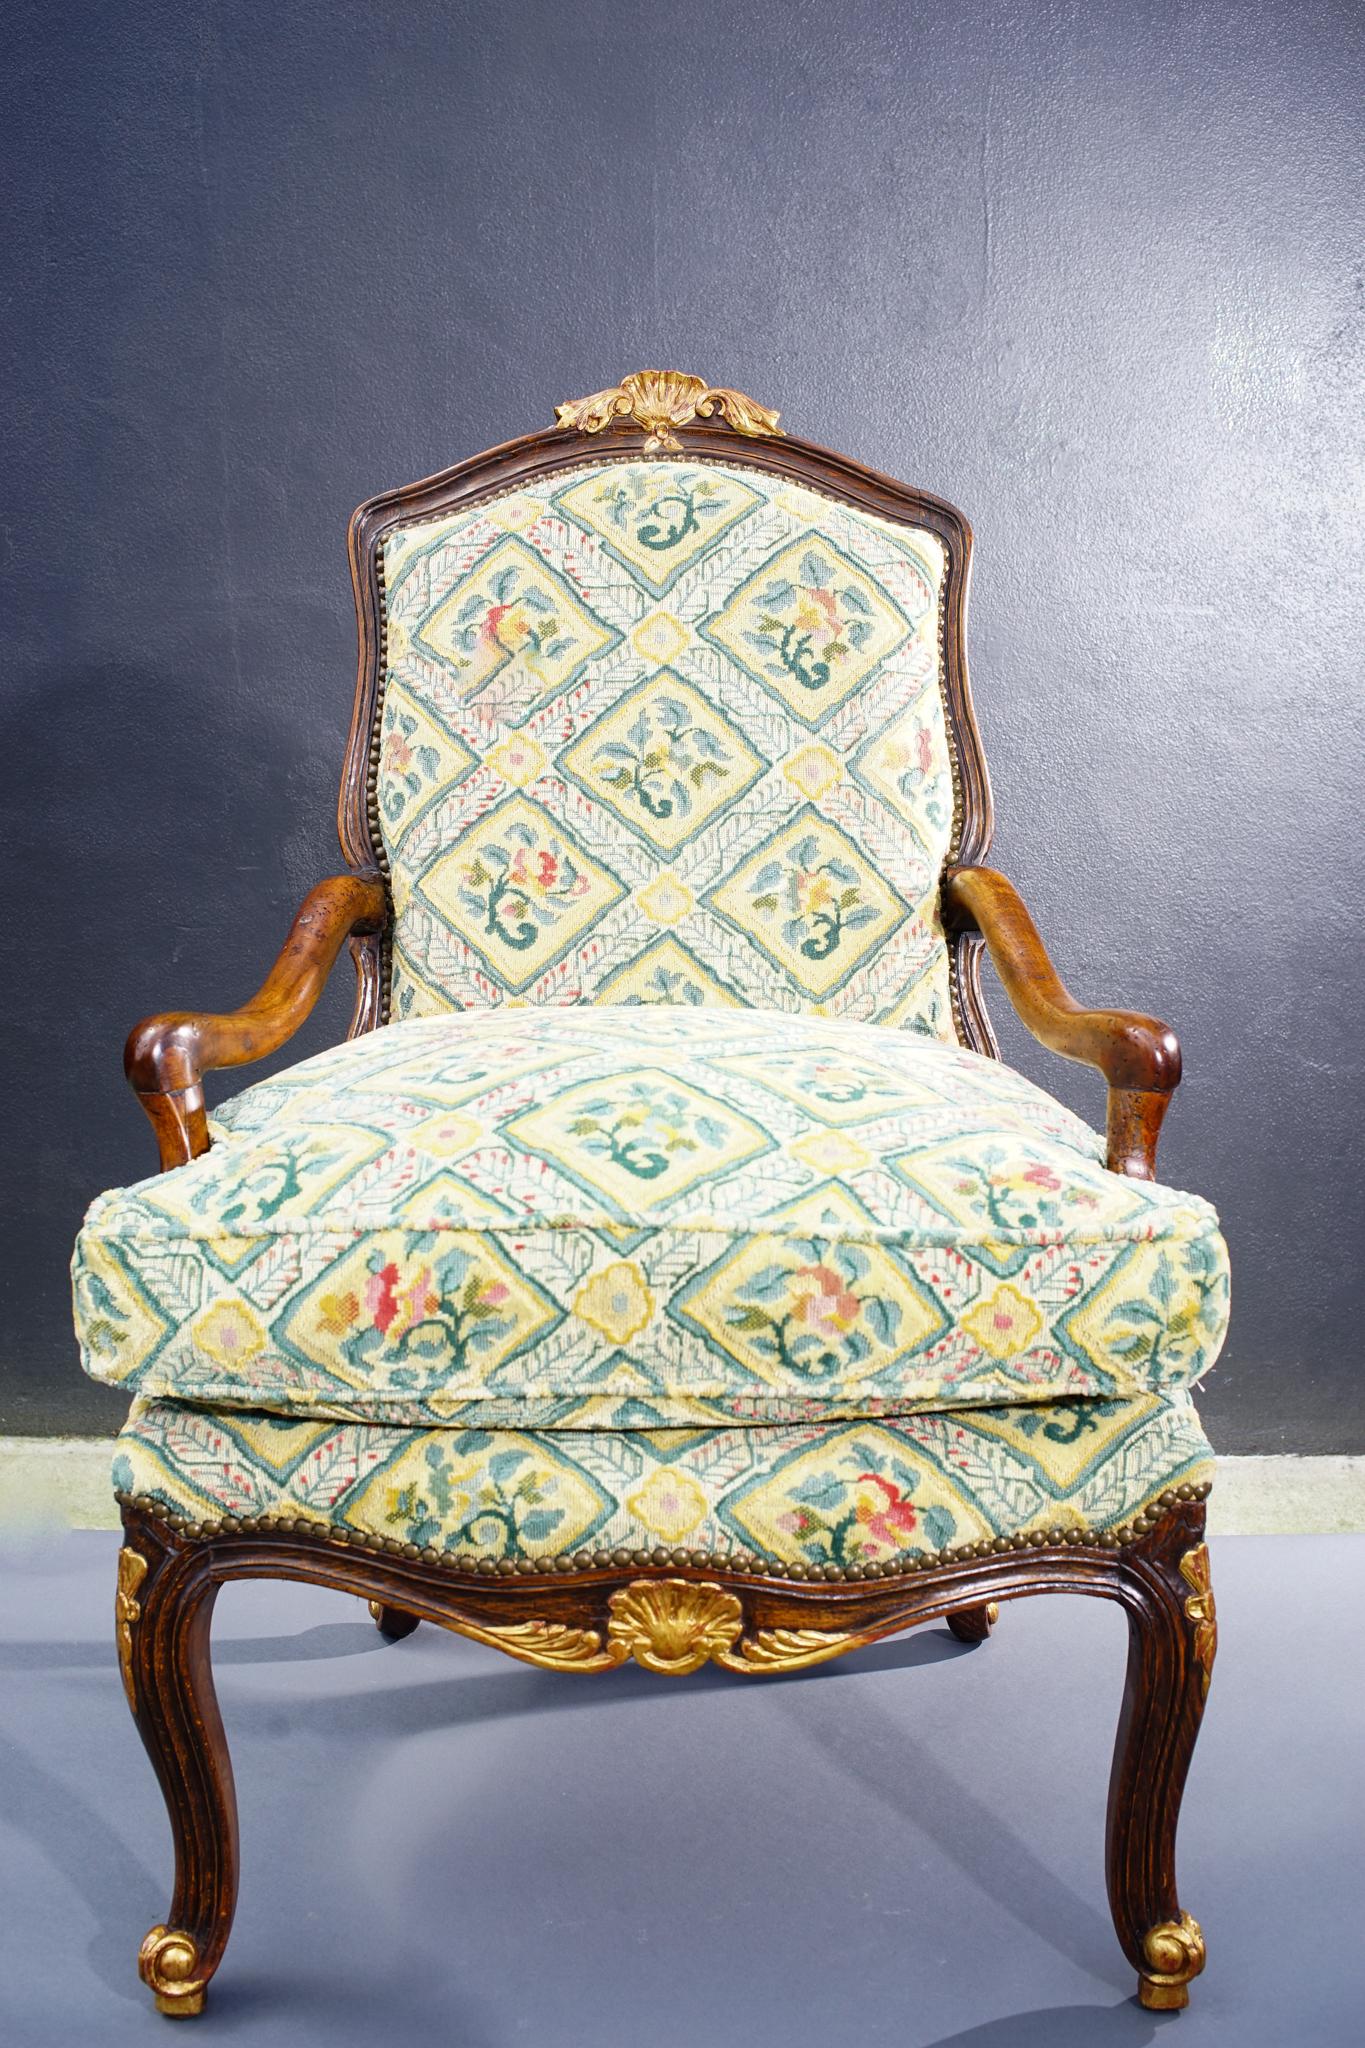 Single 18th century French carved walnut Regence armchair with gilt details. Newly upholstered in Old World Weavers material.